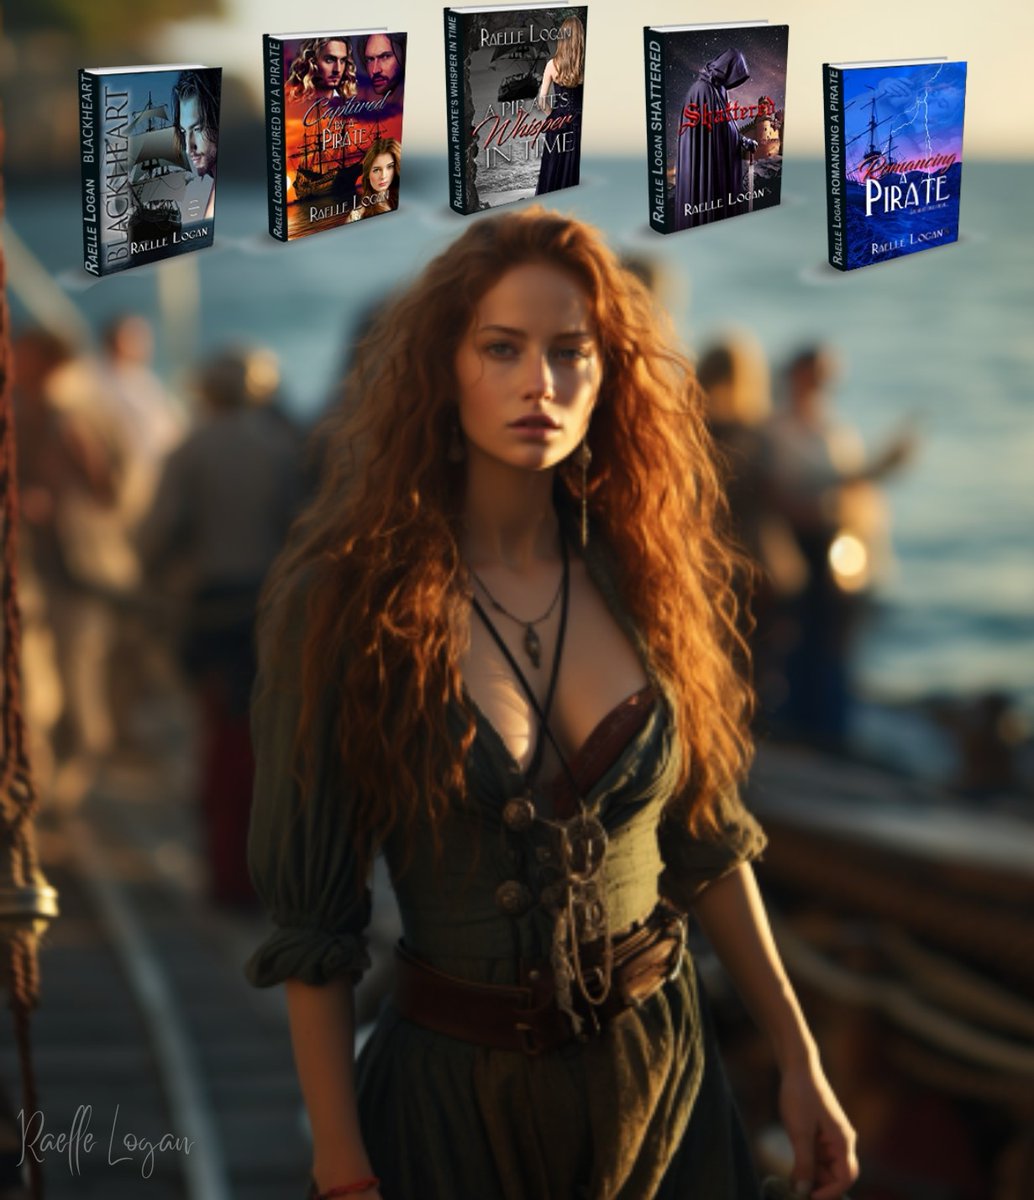 The 17th Century awaits, sail away into an exhilarating, high seas adventure where the stakes are high, the hero is a seductive and dangerous pirate, the heroine is feisty and courageous, the villains are deadly, and the romance is sizzling hot. #romance #HistoricalFiction